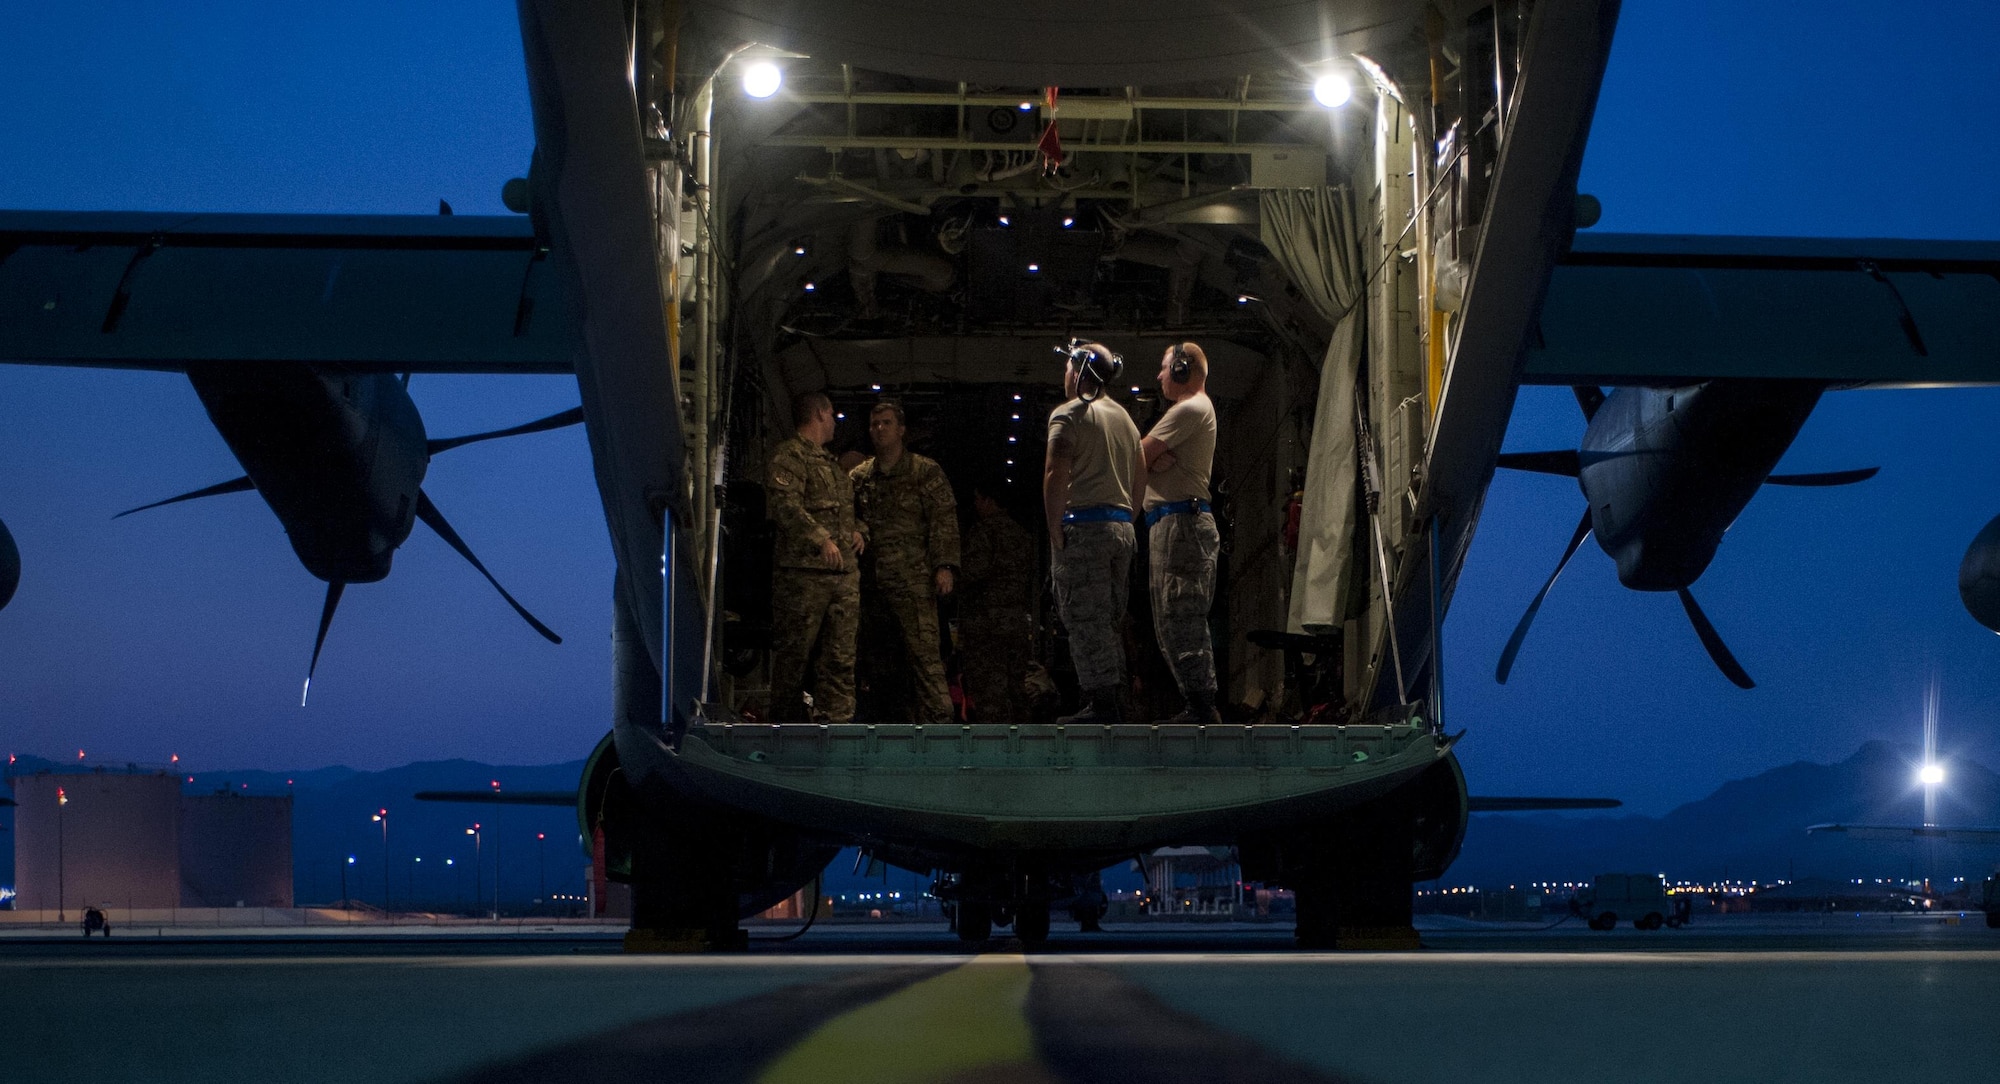 Airmen assigned to the 71st Rescue Squadron, Moody Air Force Base, Georgia, prepare the cargo area of a HC-130J Combat King II for night operations at Nellis Air Force Base, Nev., Aug. 25, 2016. Red Flag is a realistic combat exercise involving multiple military branches conducting training operations on the 15,000 square mile Nevada Test and Training Range. (U.S. Air Force photo by Airman 1st Class Kevin Tanenbaum/Released)